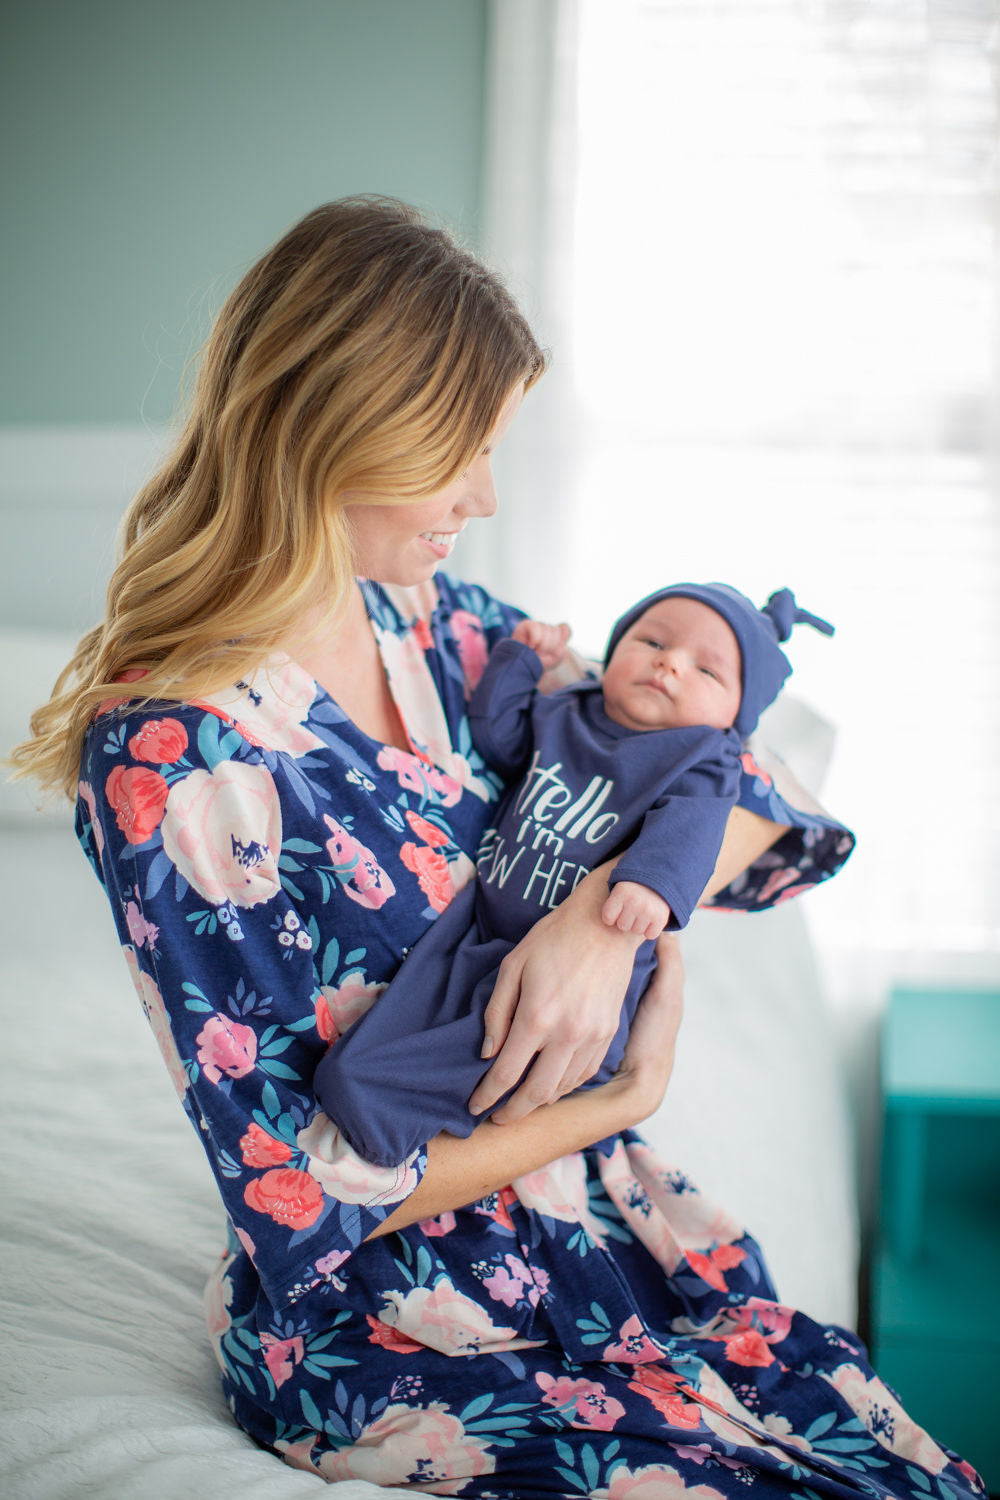 Annabelle Robe & Navy Hello I'm new here Baby Gown